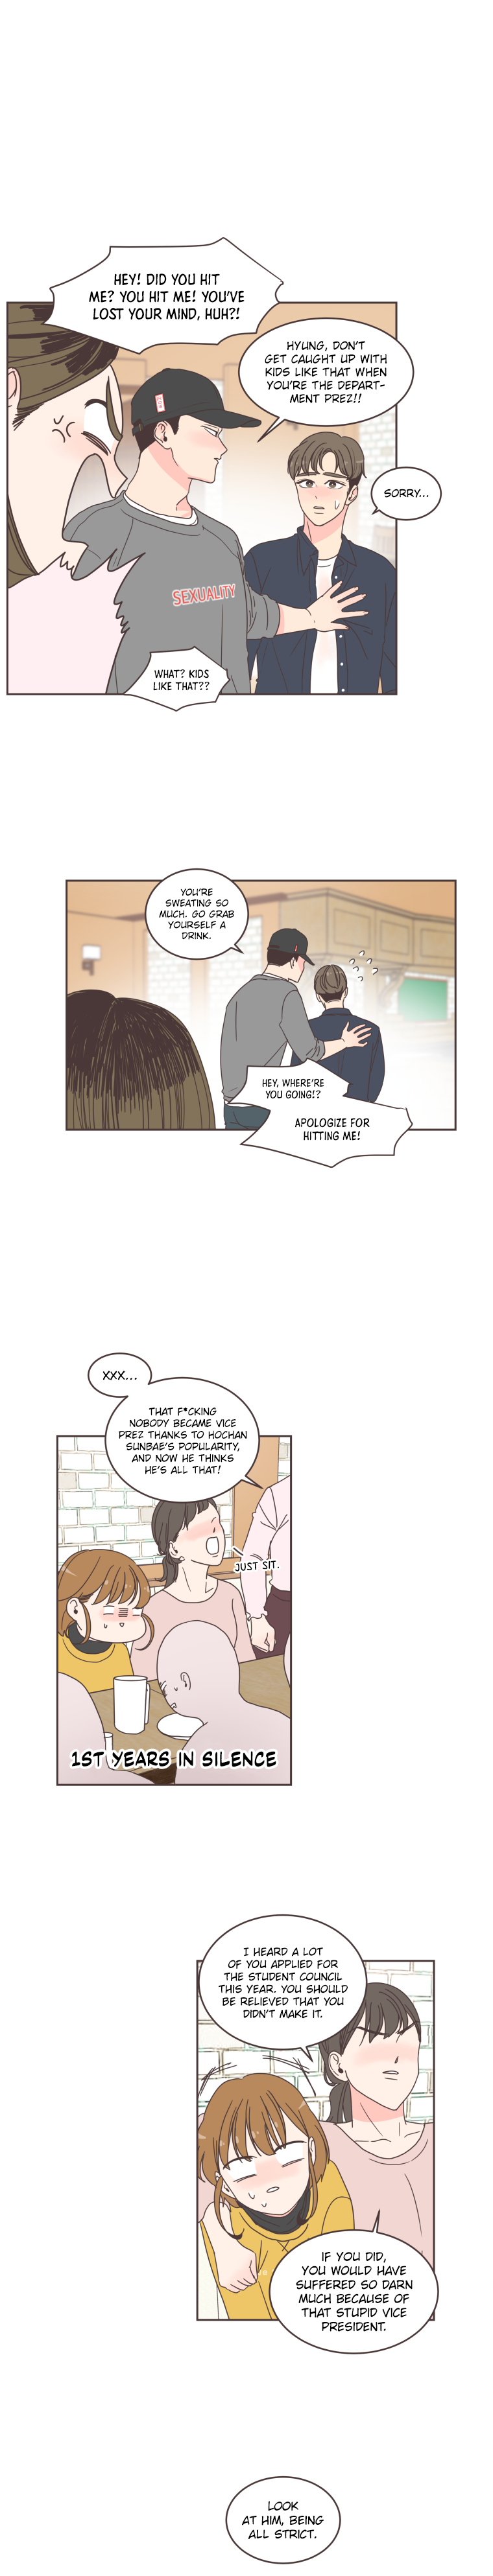 She's My Type - Chapter 8 Page 7